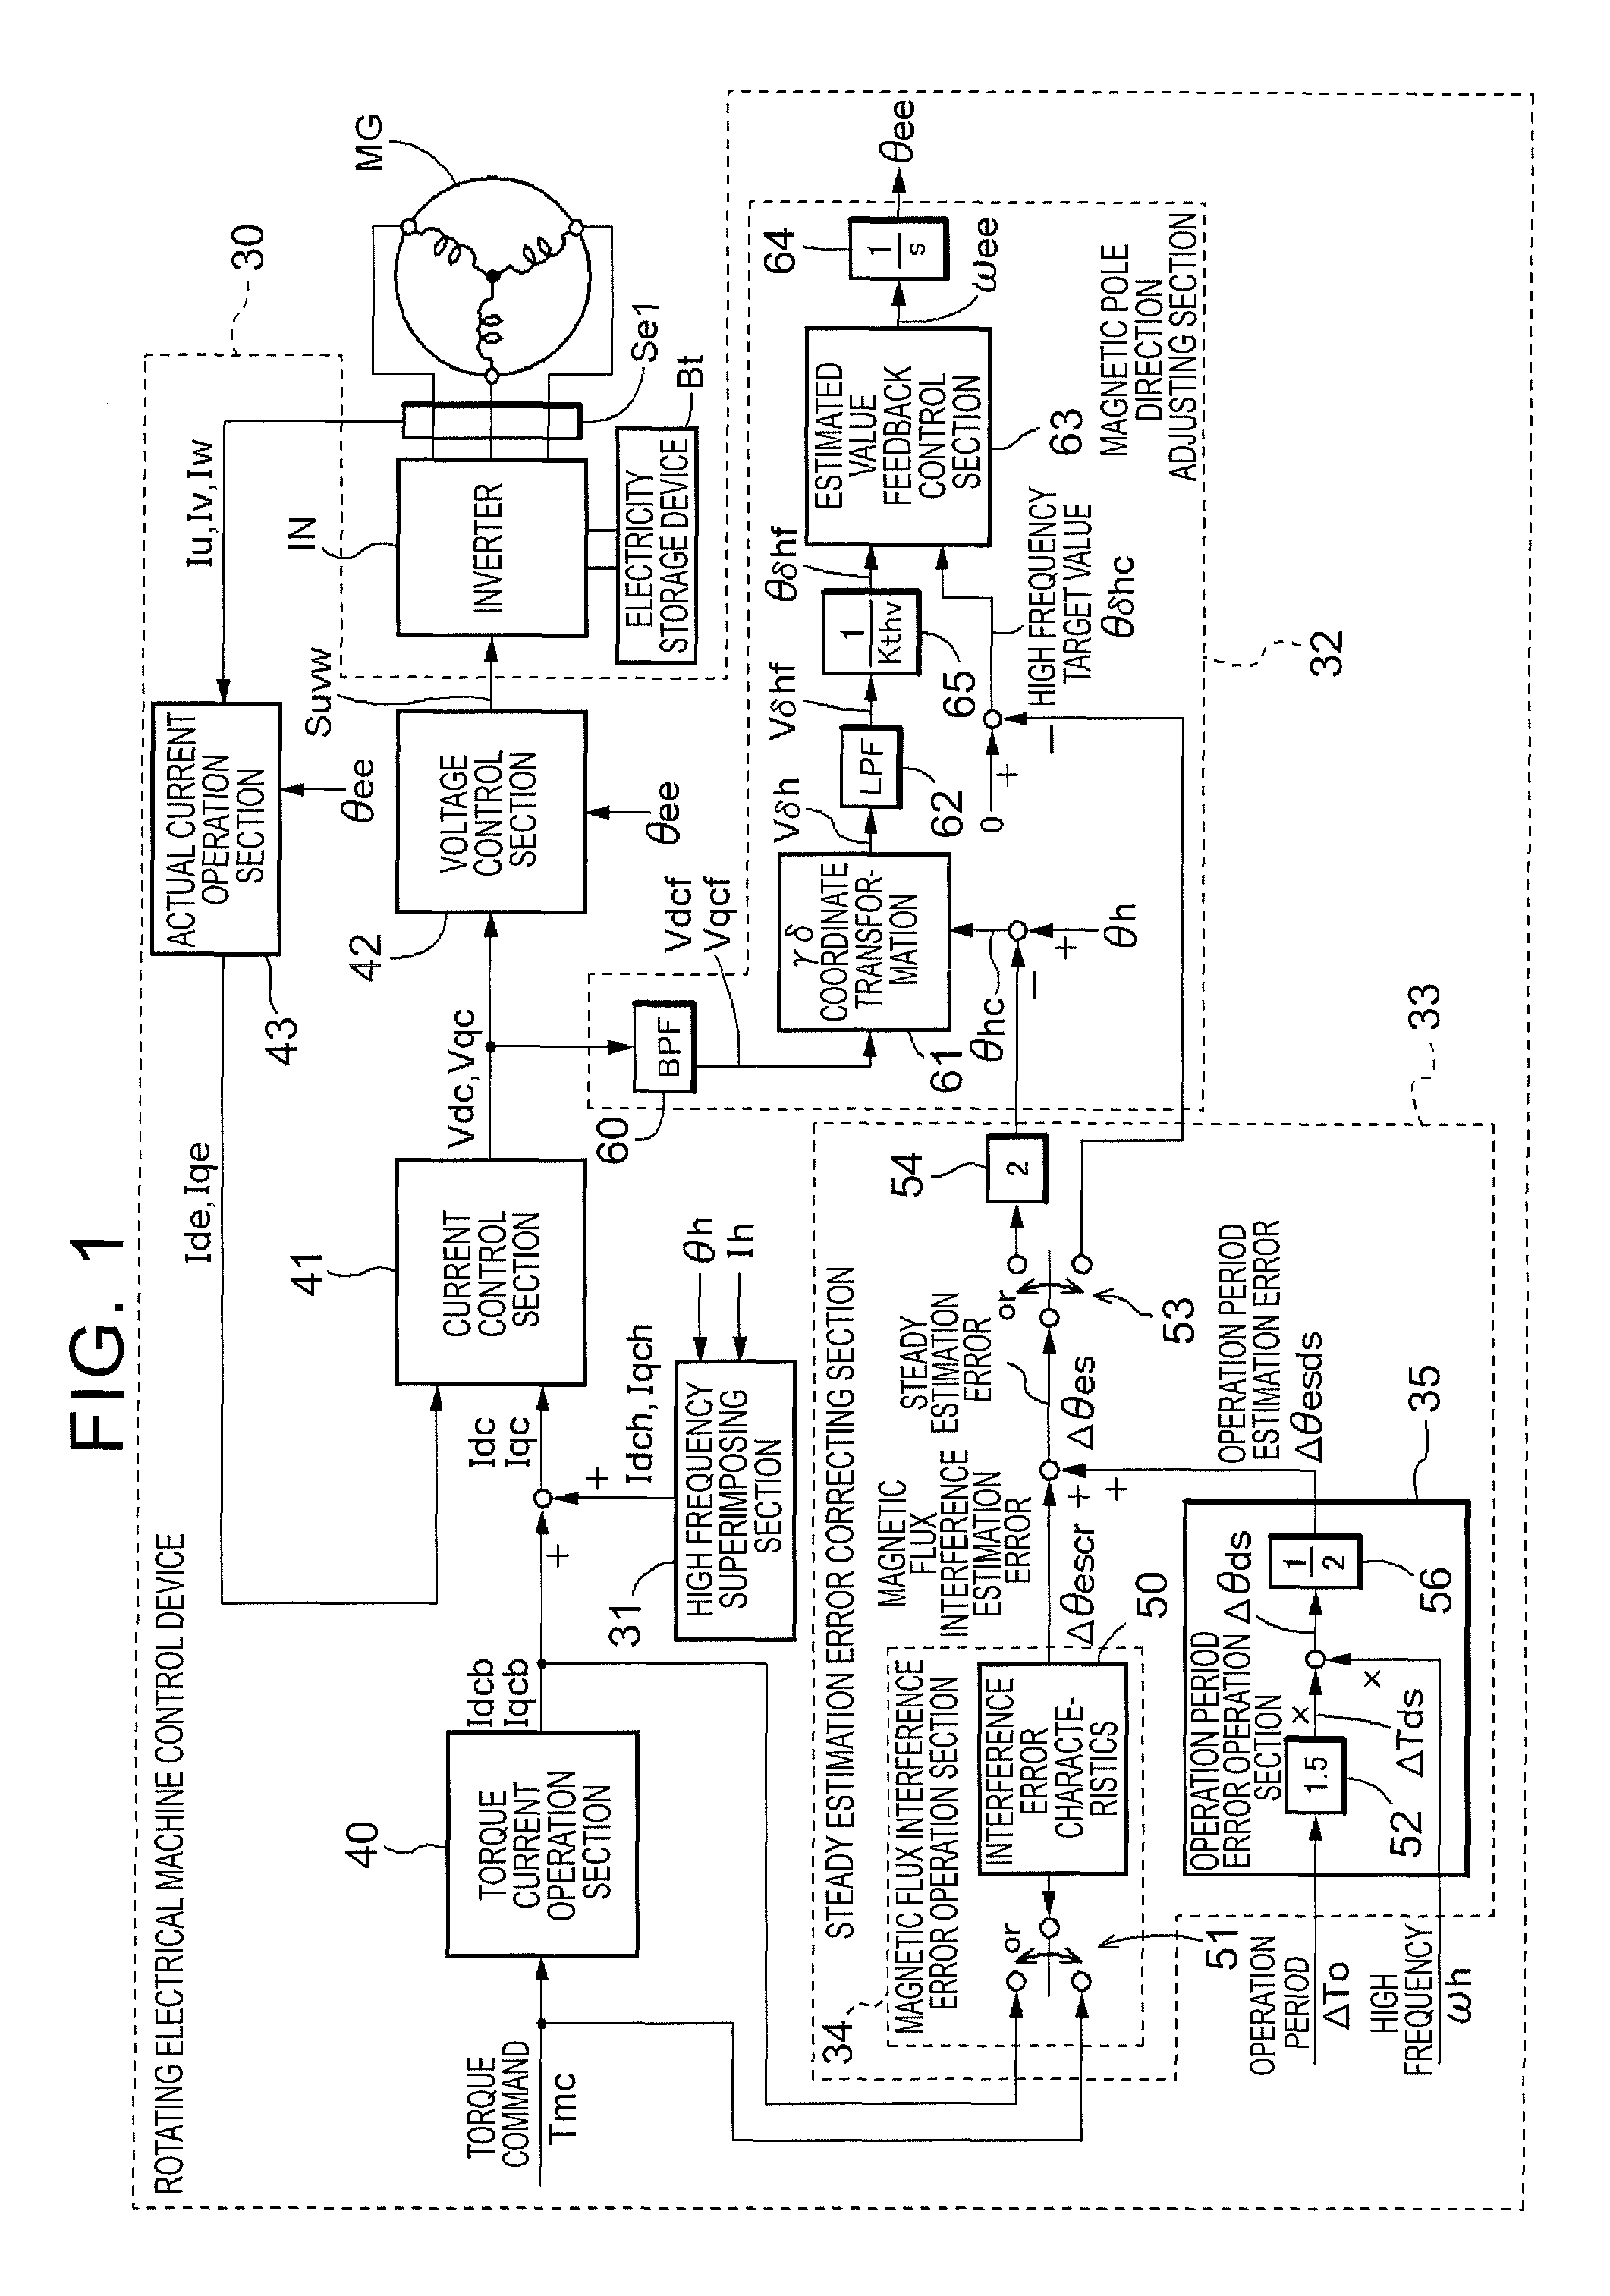 Rotating electrical machine control device